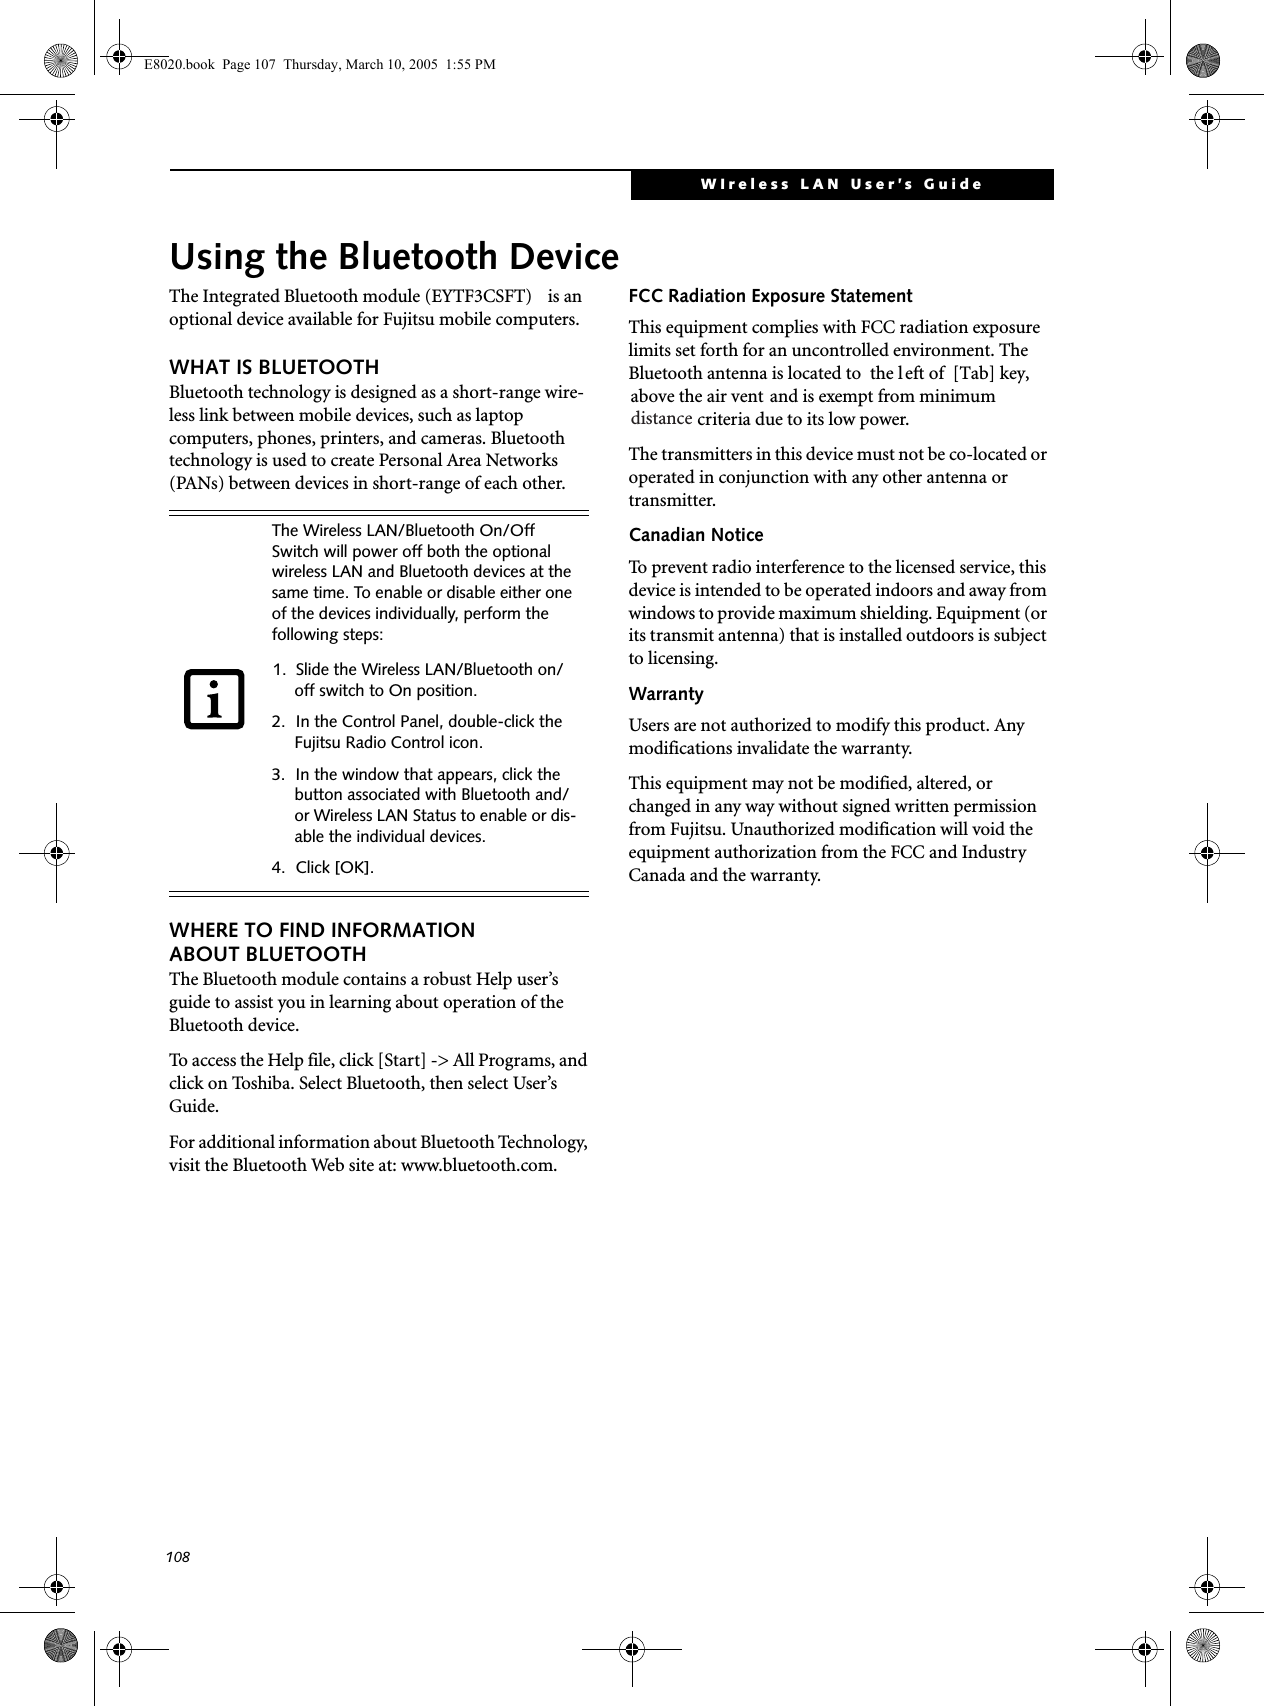 108WIreless LAN User’s Guide Using the Bluetooth DeviceThe Integrated Bluetooth module (EYTF3CSFT)  is an optional device available for Fujitsu mobile computers. WHAT IS BLUETOOTHBluetooth technology is designed as a short-range wire-less link between mobile devices, such as laptop computers, phones, printers, and cameras. Bluetooth technology is used to create Personal Area Networks (PANs) between devices in short-range of each other. WHERE TO FIND INFORMATIONABOUT BLUETOOTHThe Bluetooth module contains a robust Help user’s guide to assist you in learning about operation of the Bluetooth device.To access the Help file, click [Start] -&gt; All Programs, and click on Toshiba. Select Bluetooth, then select User’s Guide.For additional information about Bluetooth Technology, visit the Bluetooth Web site at: www.bluetooth.com.FCC Radiation Exposure StatementThis equipment complies with FCC radiation exposure limits set forth for an uncontrolled environment. The Bluetooth antenna is located to  the l eft of  [Tab] key,above the air vent and is exempt from minimum   criteria due to its low power. The transmitters in this device must not be co-located or operated in conjunction with any other antenna or transmitter.Canadian NoticeTo prevent radio interference to the licensed service, this device is intended to be operated indoors and away from windows to provide maximum shielding. Equipment (or its transmit antenna) that is installed outdoors is subject to licensing.WarrantyUsers are not authorized to modify this product. Any modifications invalidate the warranty.This equipment may not be modified, altered, or changed in any way without signed written permission from Fujitsu. Unauthorized modification will void the equipment authorization from the FCC and Industry Canada and the warranty.The Wireless LAN/Bluetooth On/Off Switch will power off both the optional wireless LAN and Bluetooth devices at the same time. To enable or disable either one of the devices individually, perform the following steps:1. Slide the Wireless LAN/Bluetooth on/off switch to On position.2. In the Control Panel, double-click the Fujitsu Radio Control icon.3. In the window that appears, click the button associated with Bluetooth and/or Wireless LAN Status to enable or dis-able the individual devices.4. Click [OK].E8020.book  Page 107  Thursday, March 10, 2005  1:55 PMdistance